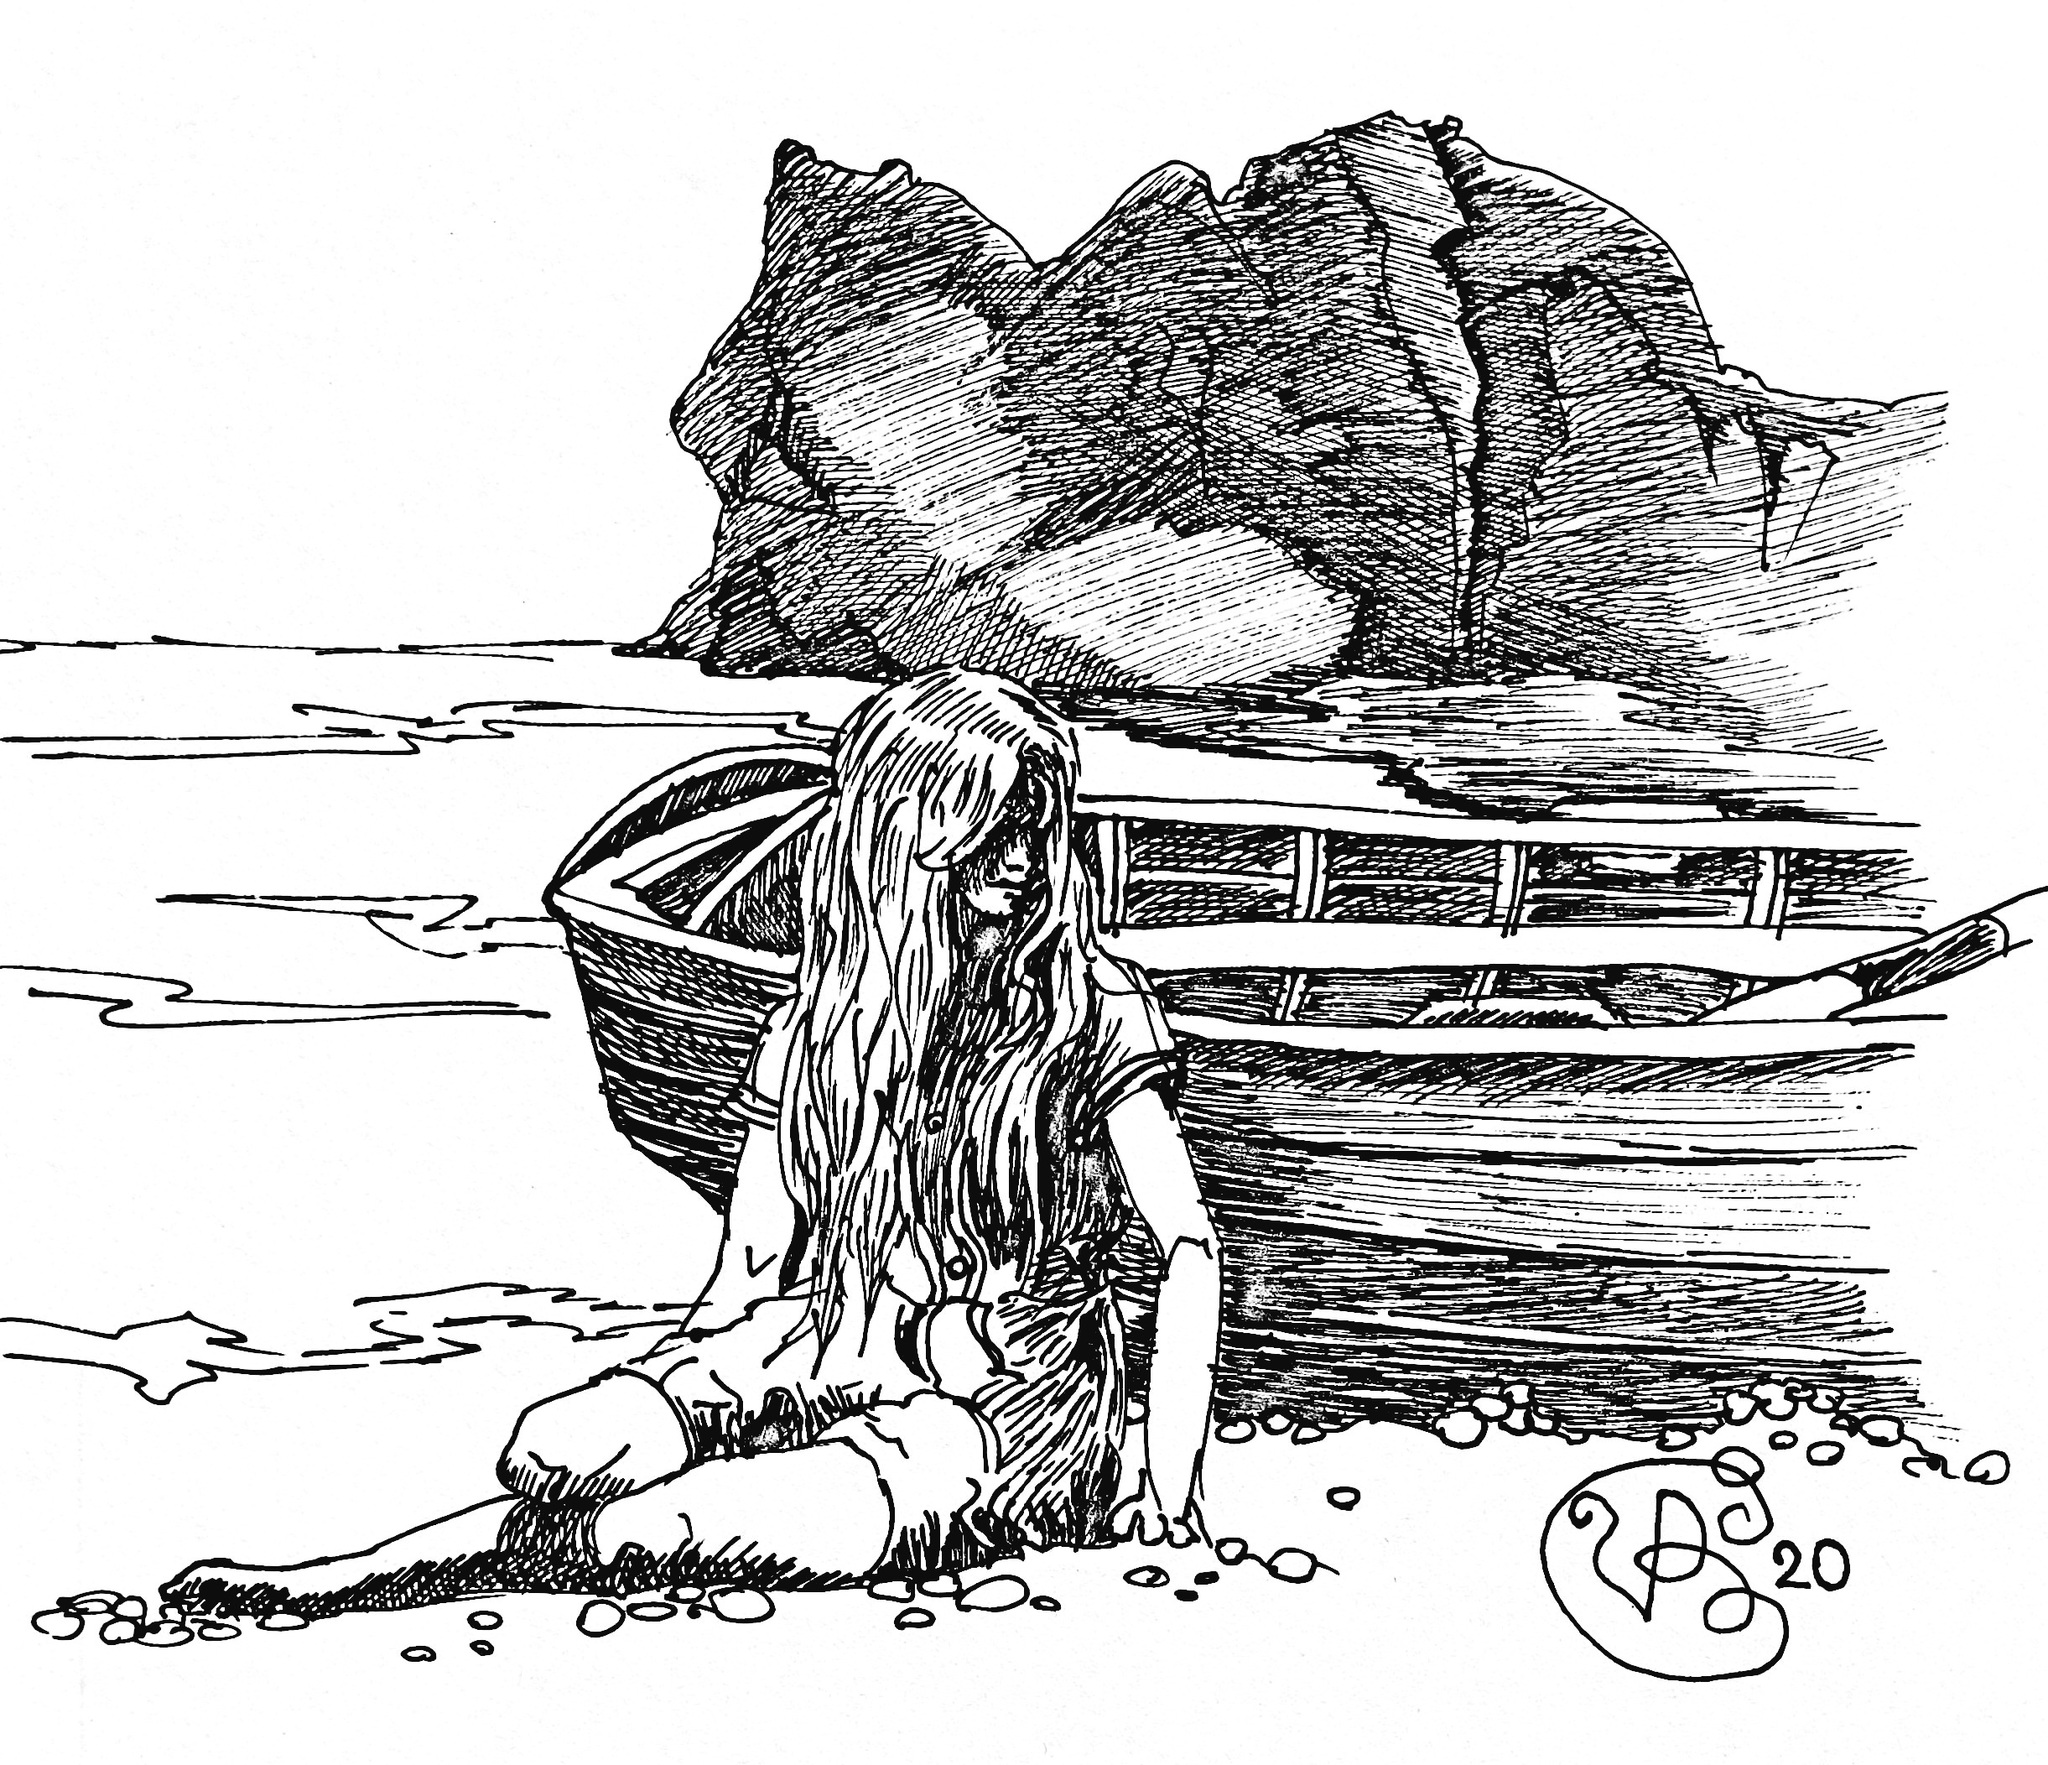 On the shore - My, Hobby, Sketch, Liner, Art